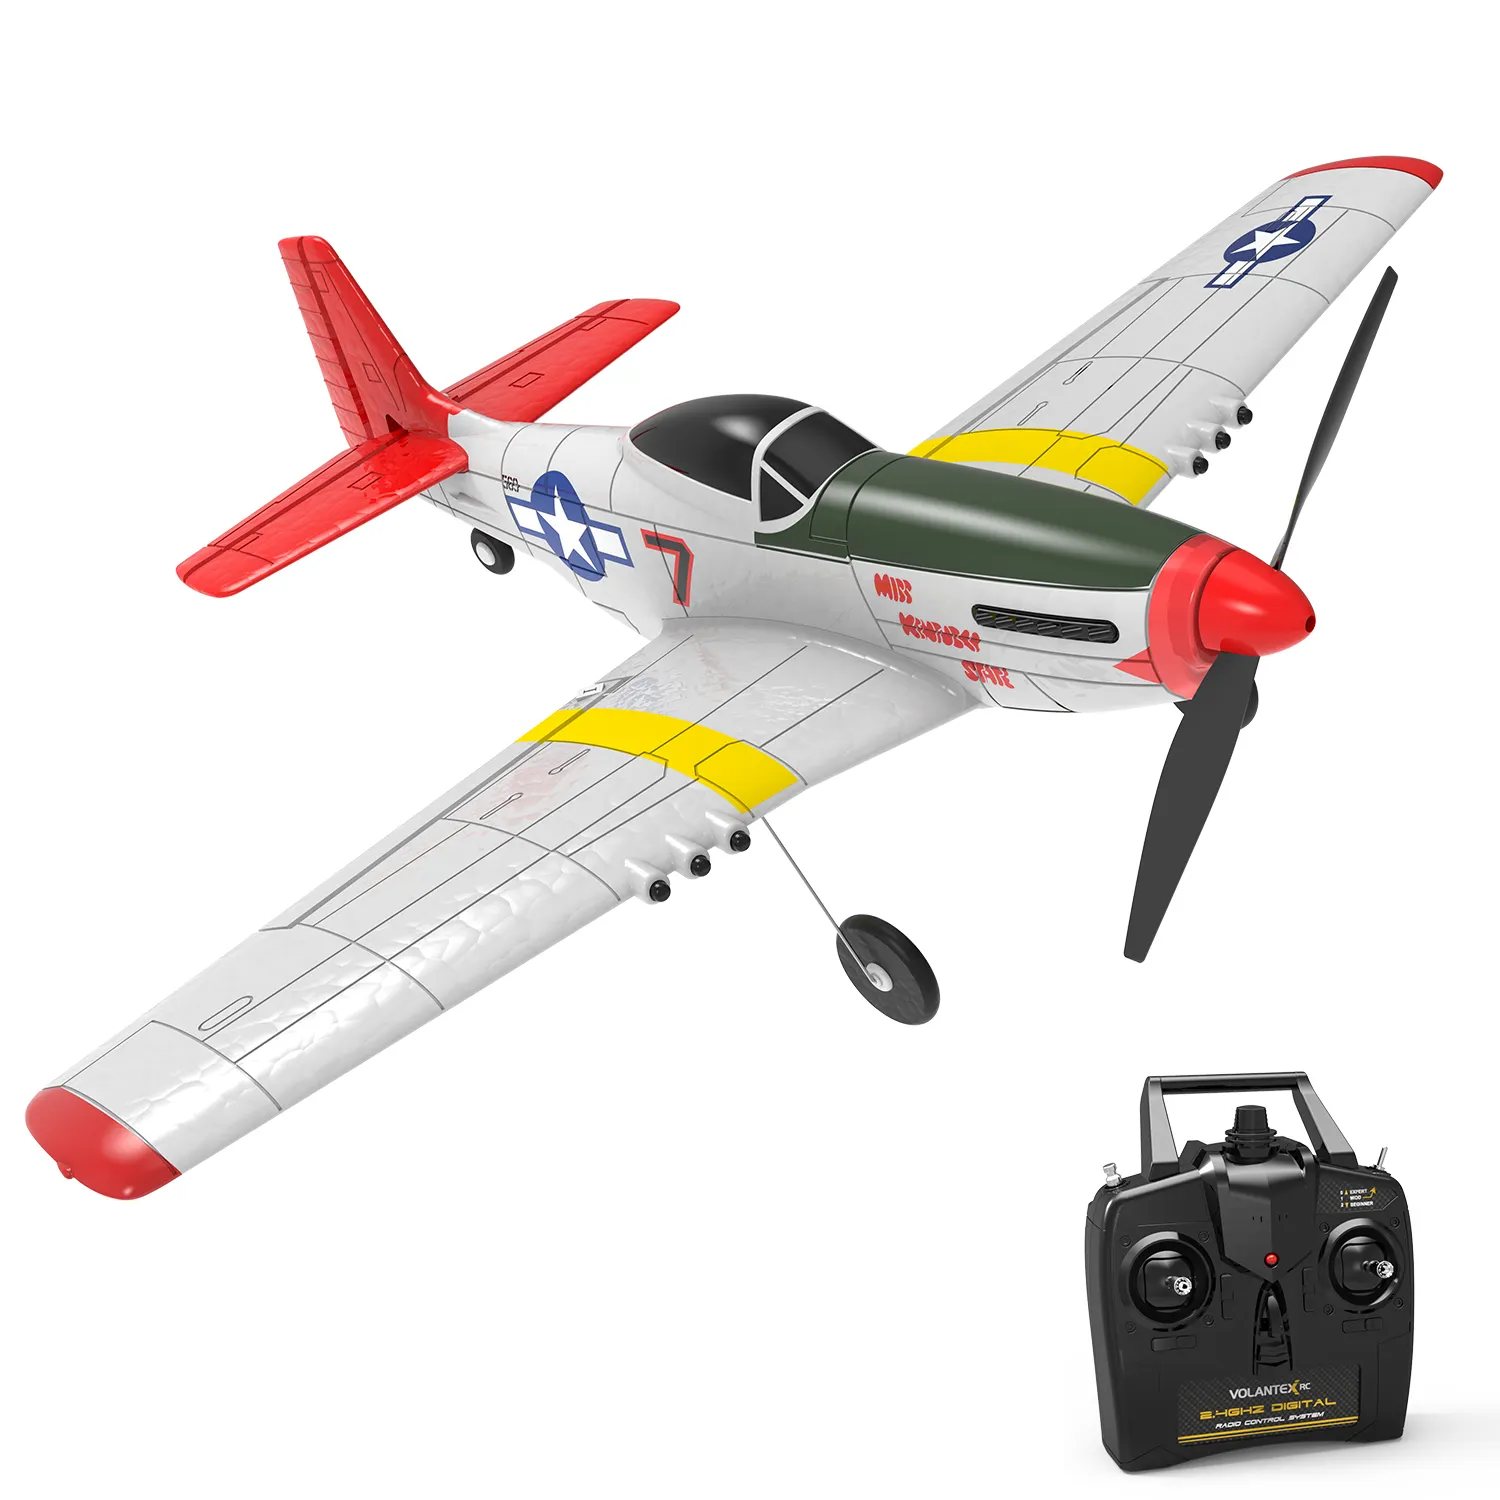 Mini EPP 400mm Wingspan 2.4G 6-Axis Electric RC Airplane Trainer 14mins Fight Time Fixed Wing RTF for Beginner aircraft model